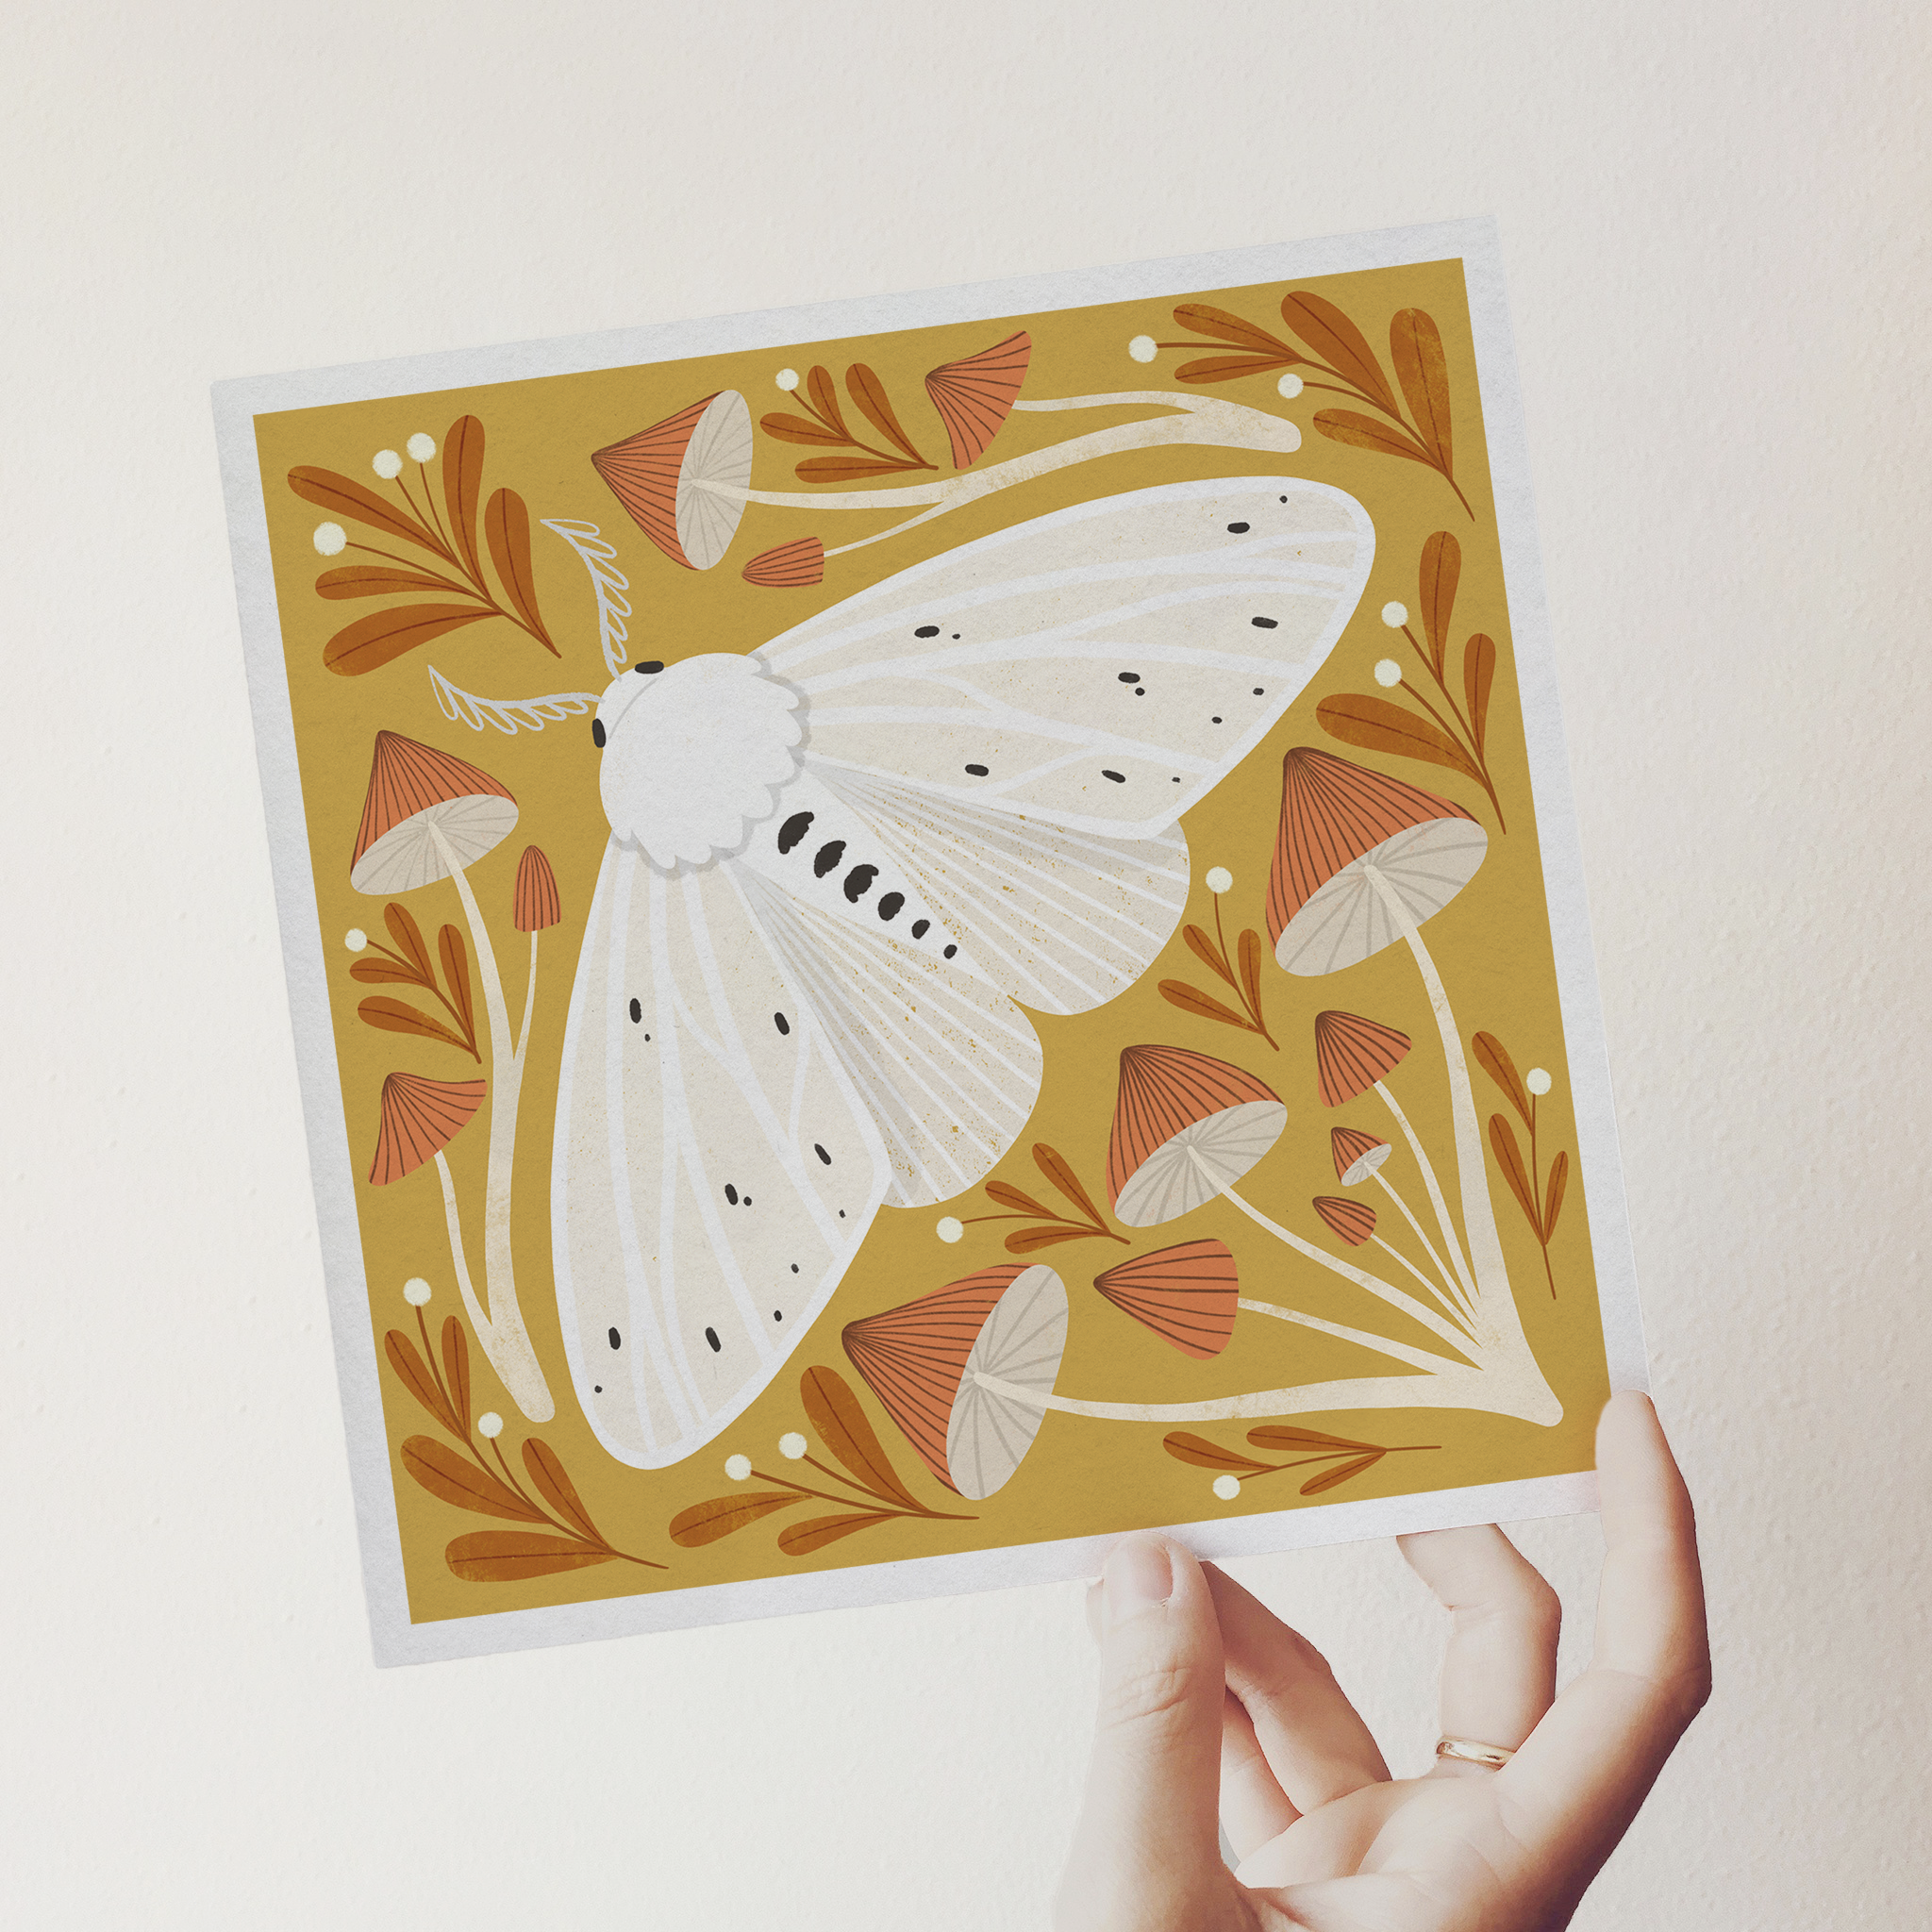 art print showing an agreeable tiger moth in black and white on a mustard yellow background, surrounded by red and white whimsical mushrooms. shown being held by a hand.